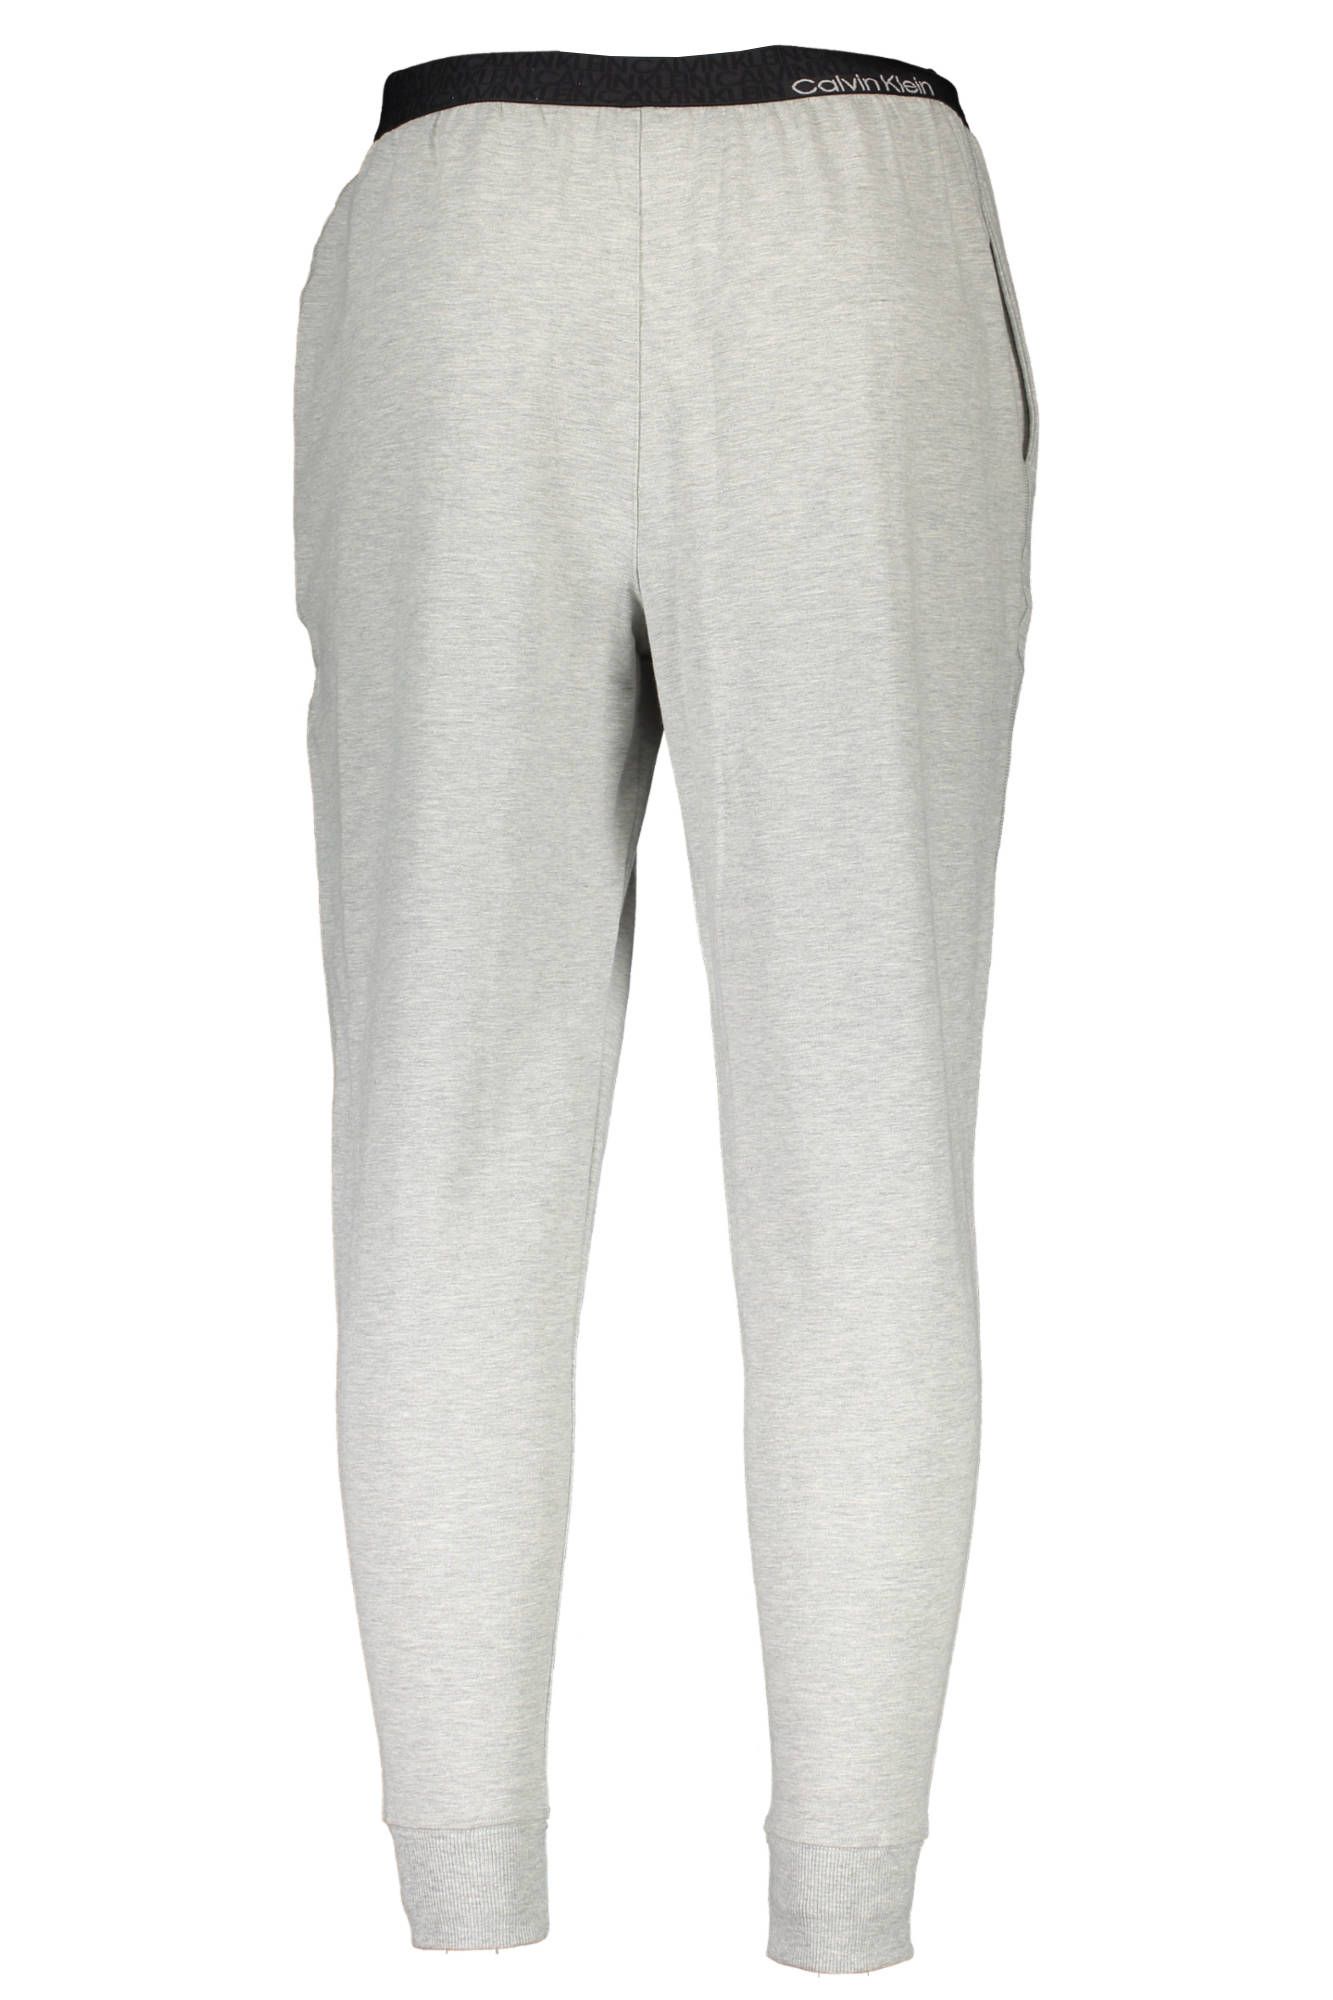 Elegant Gray Tailored Trousers with Contrast Details